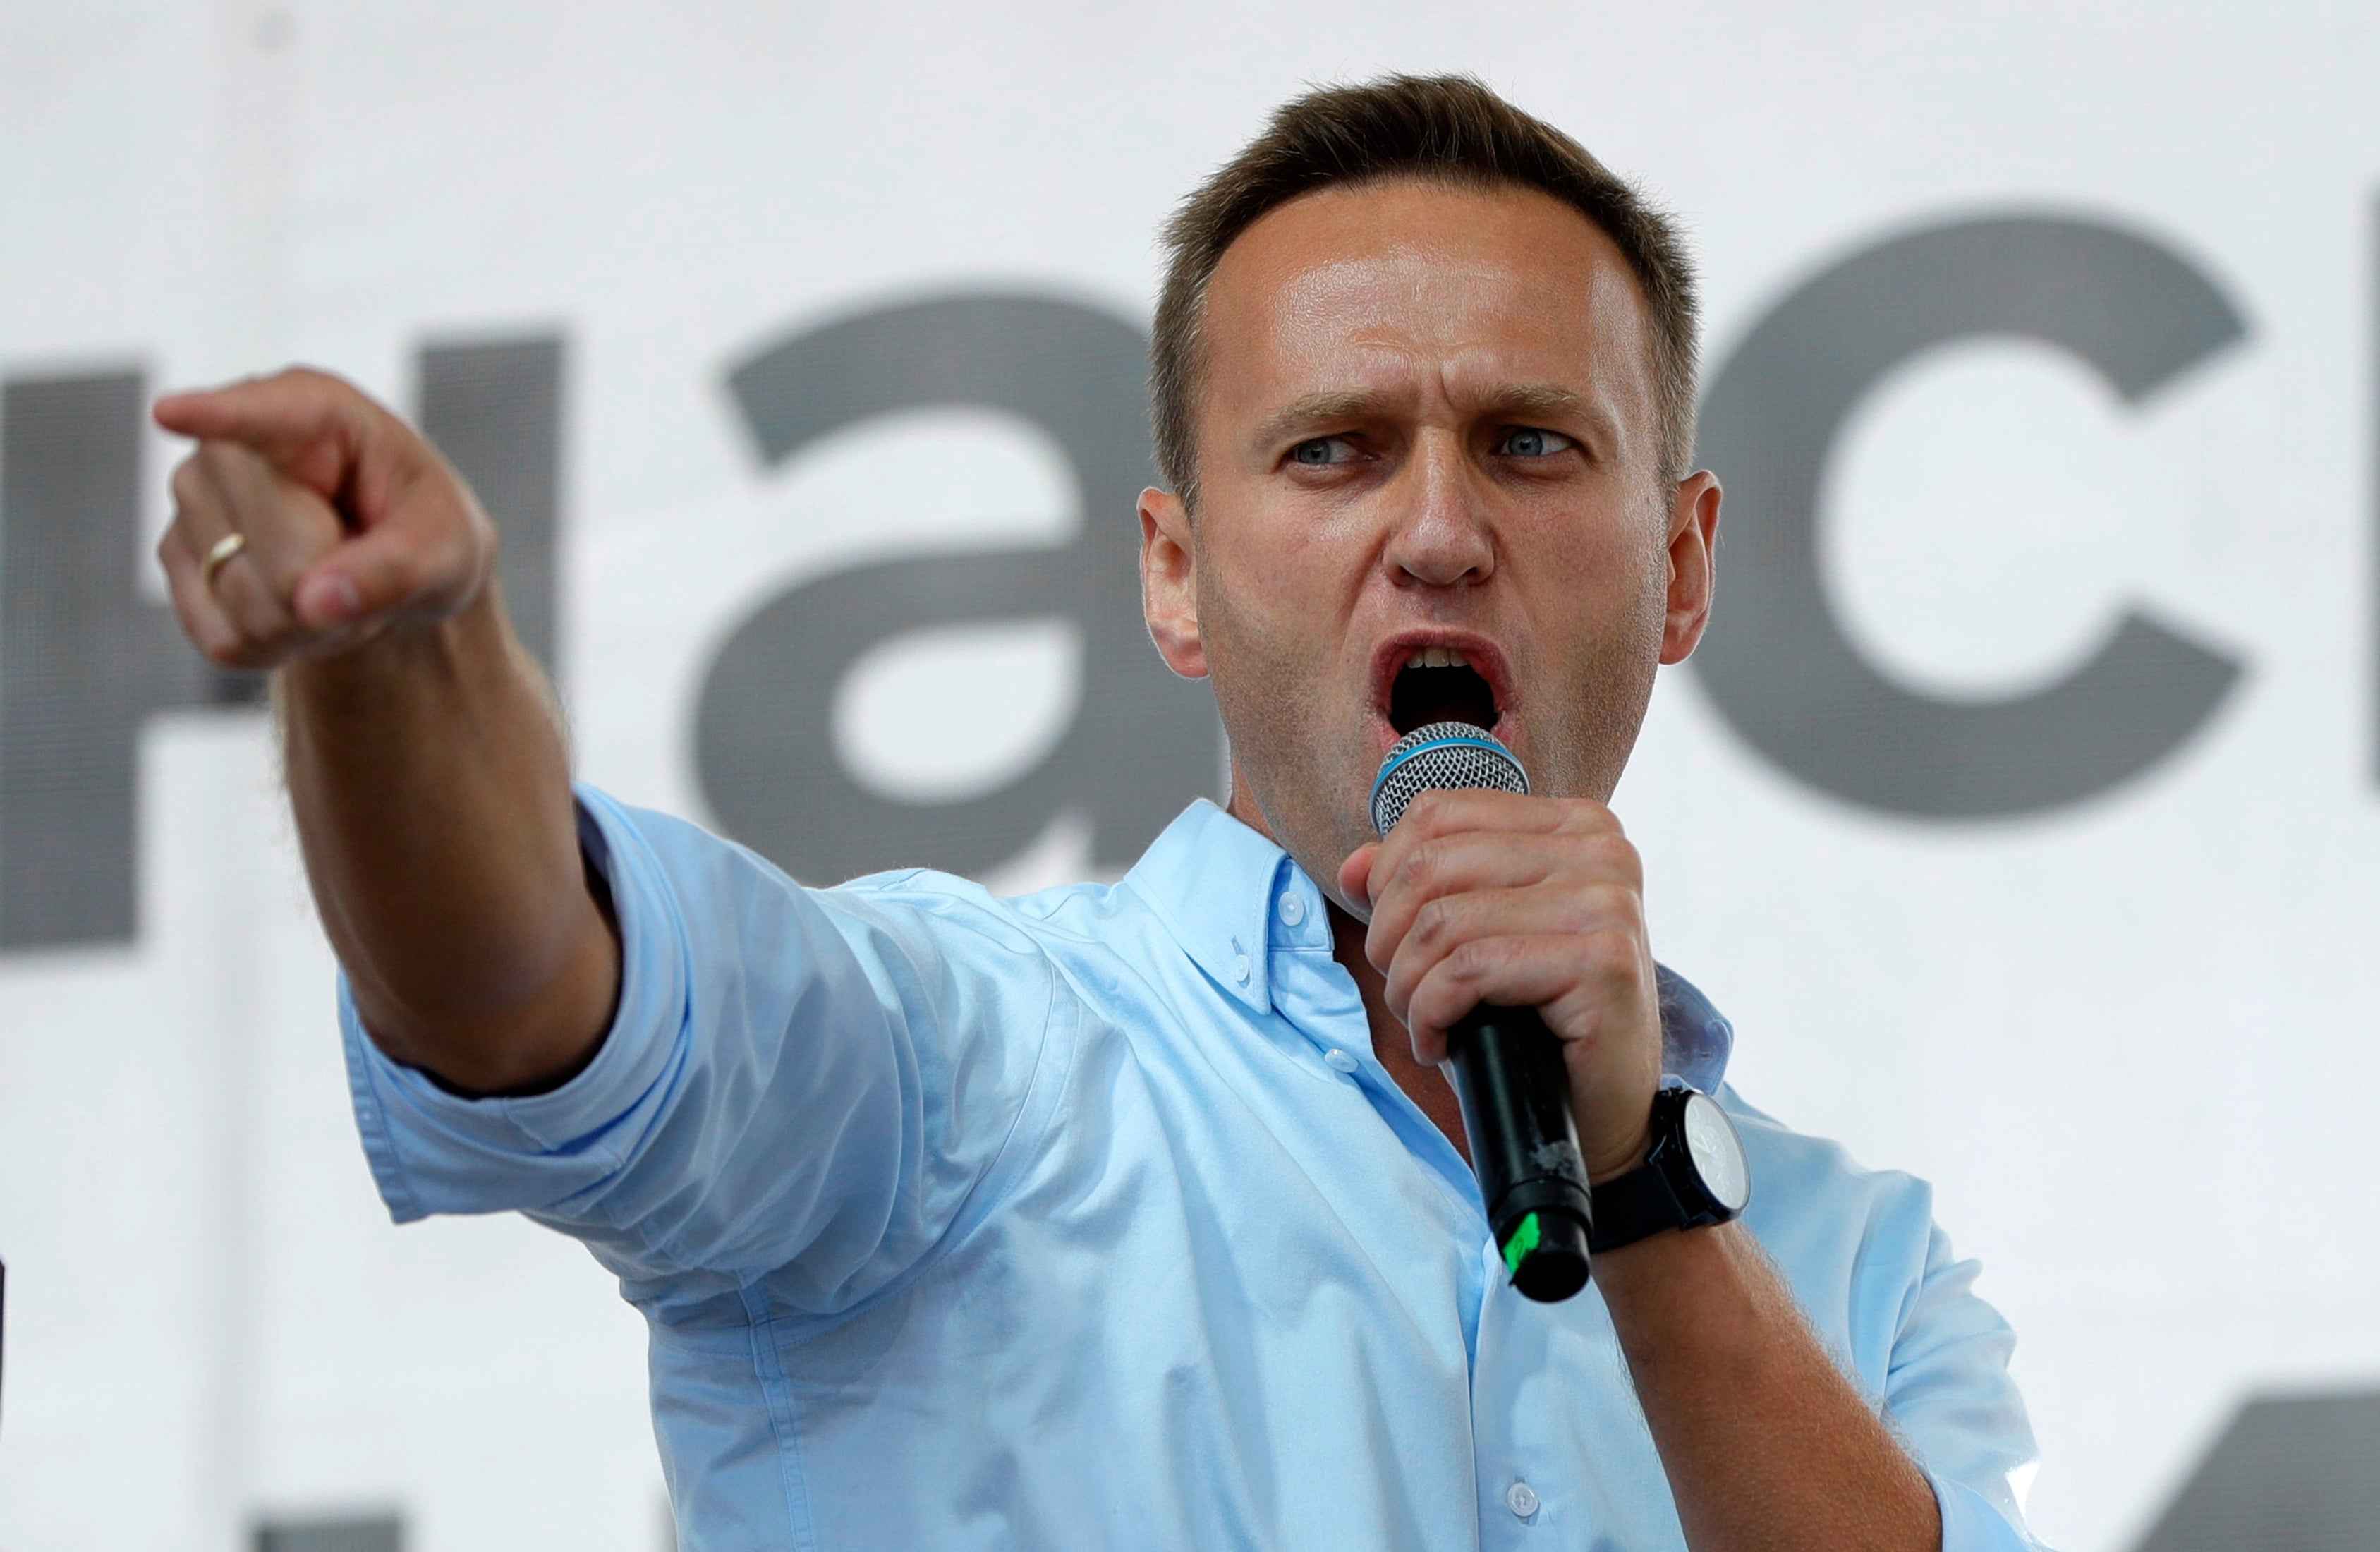 Navalny made headlines earlier this year after a suspected Novichok poisoning almost killed him